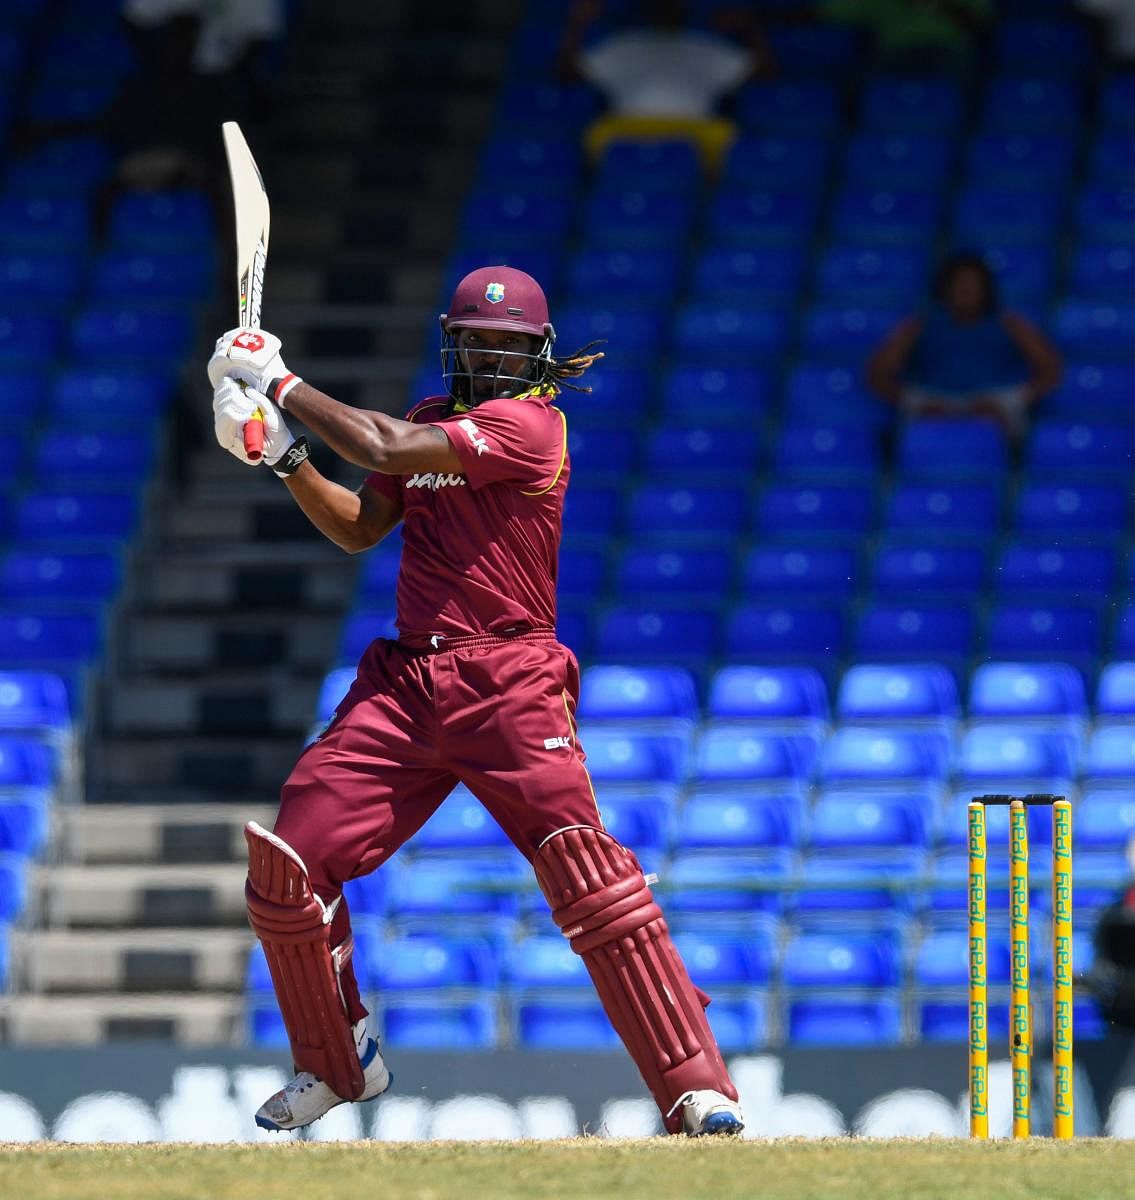 STILL CHUGGING: Chris Gayle’s good form augurs well for the West Indies in the World Cup.AFP